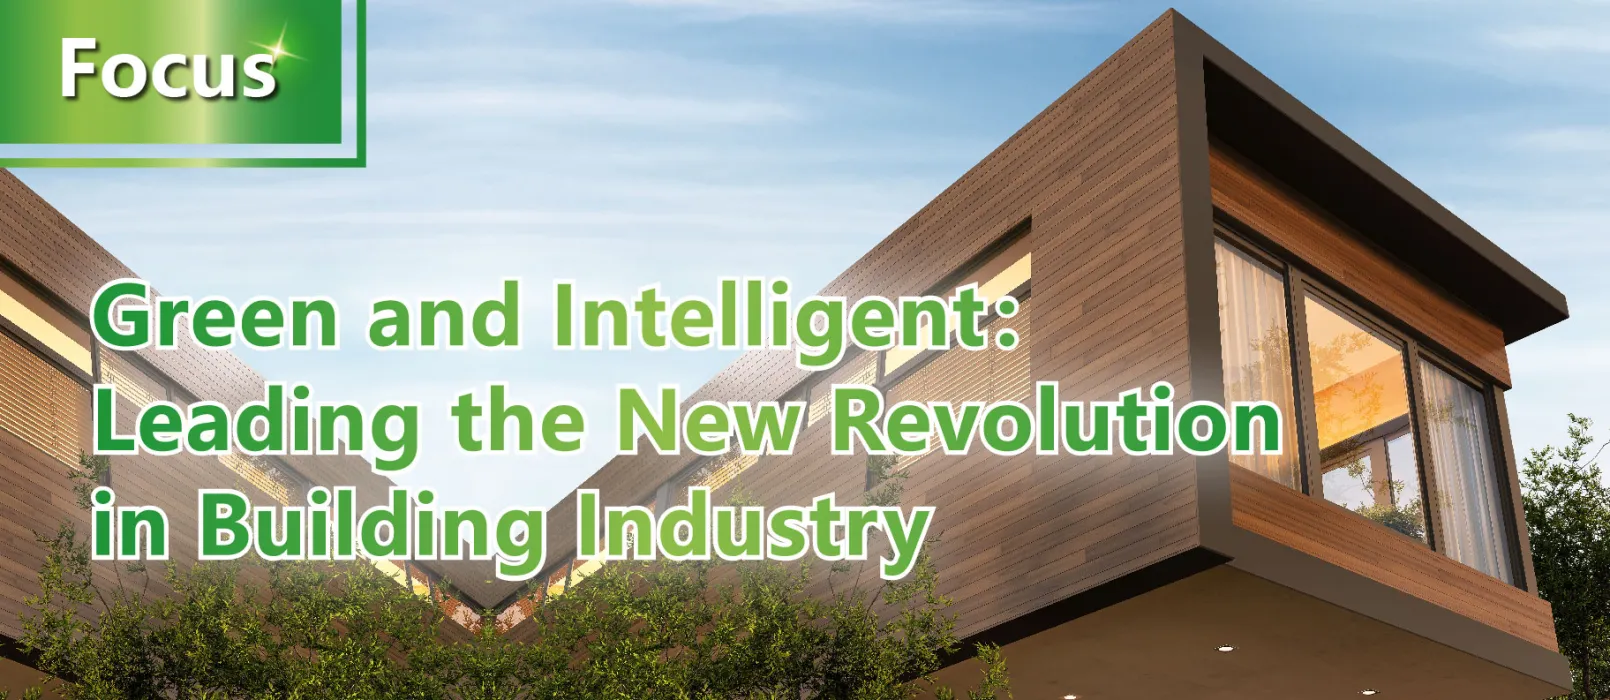 Green and Intelligent: Leading the New Revolution in Building Industry